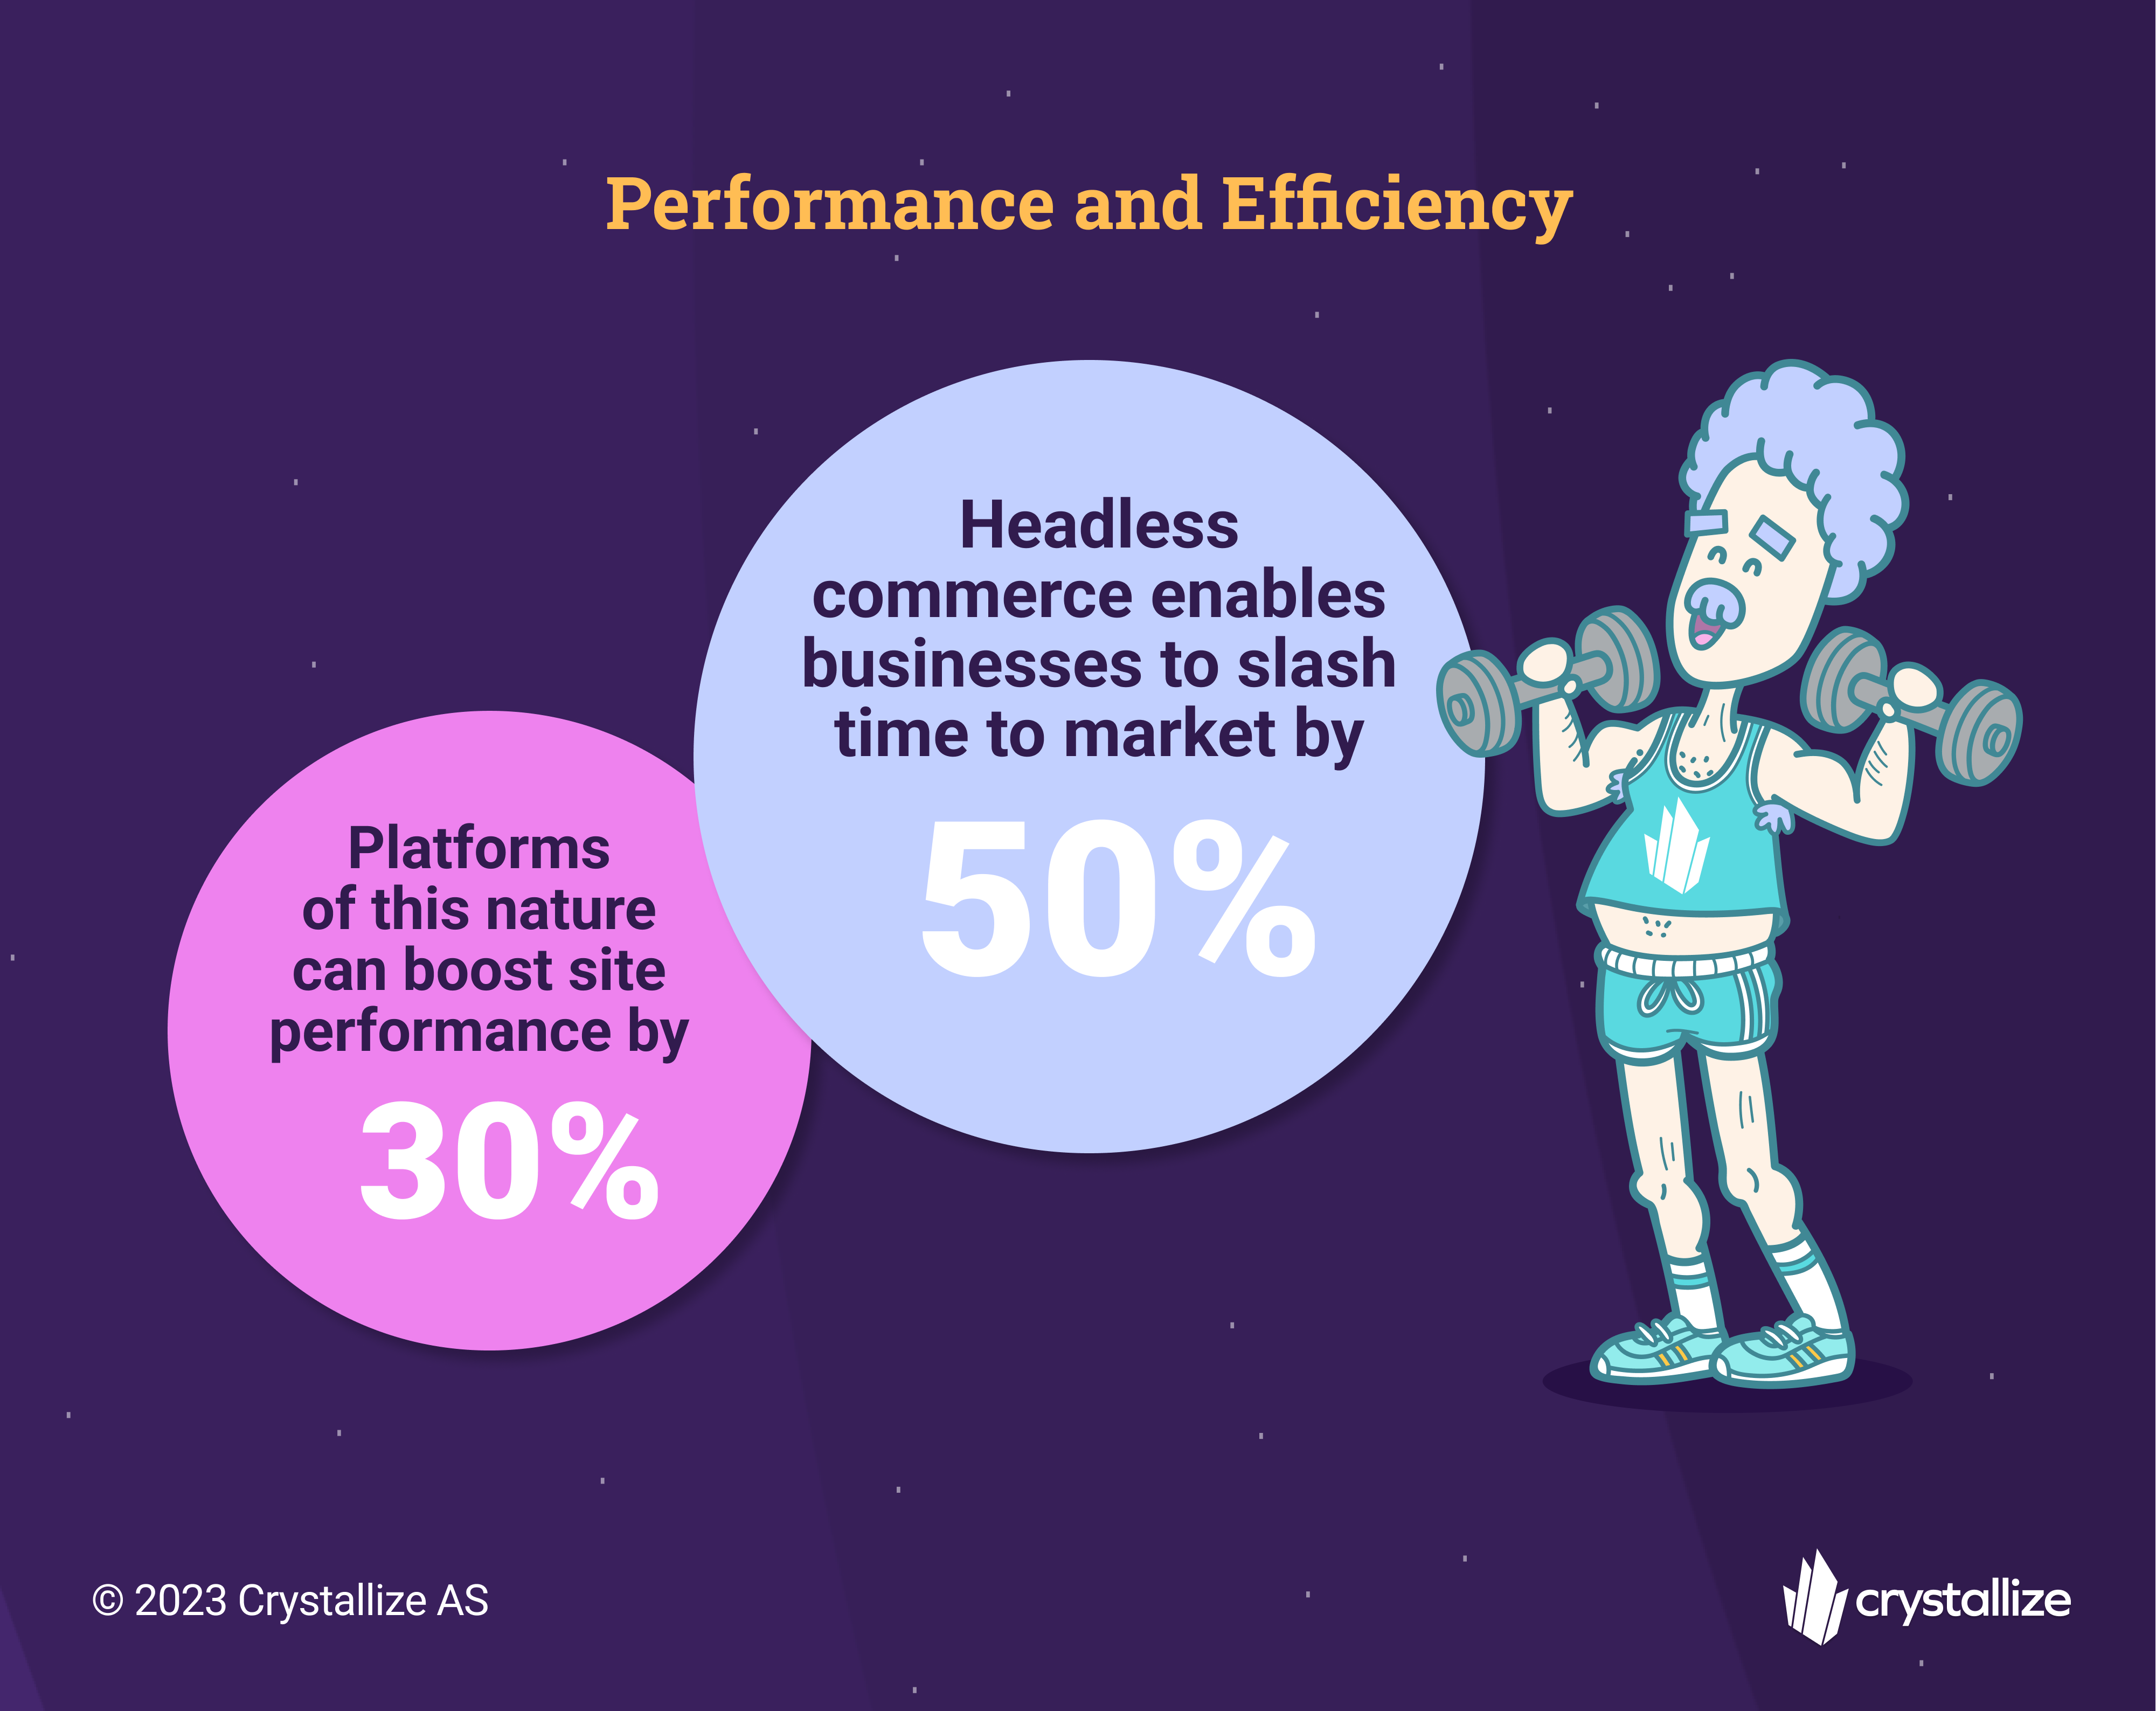 Performance and Efficiency of Headless Commerce